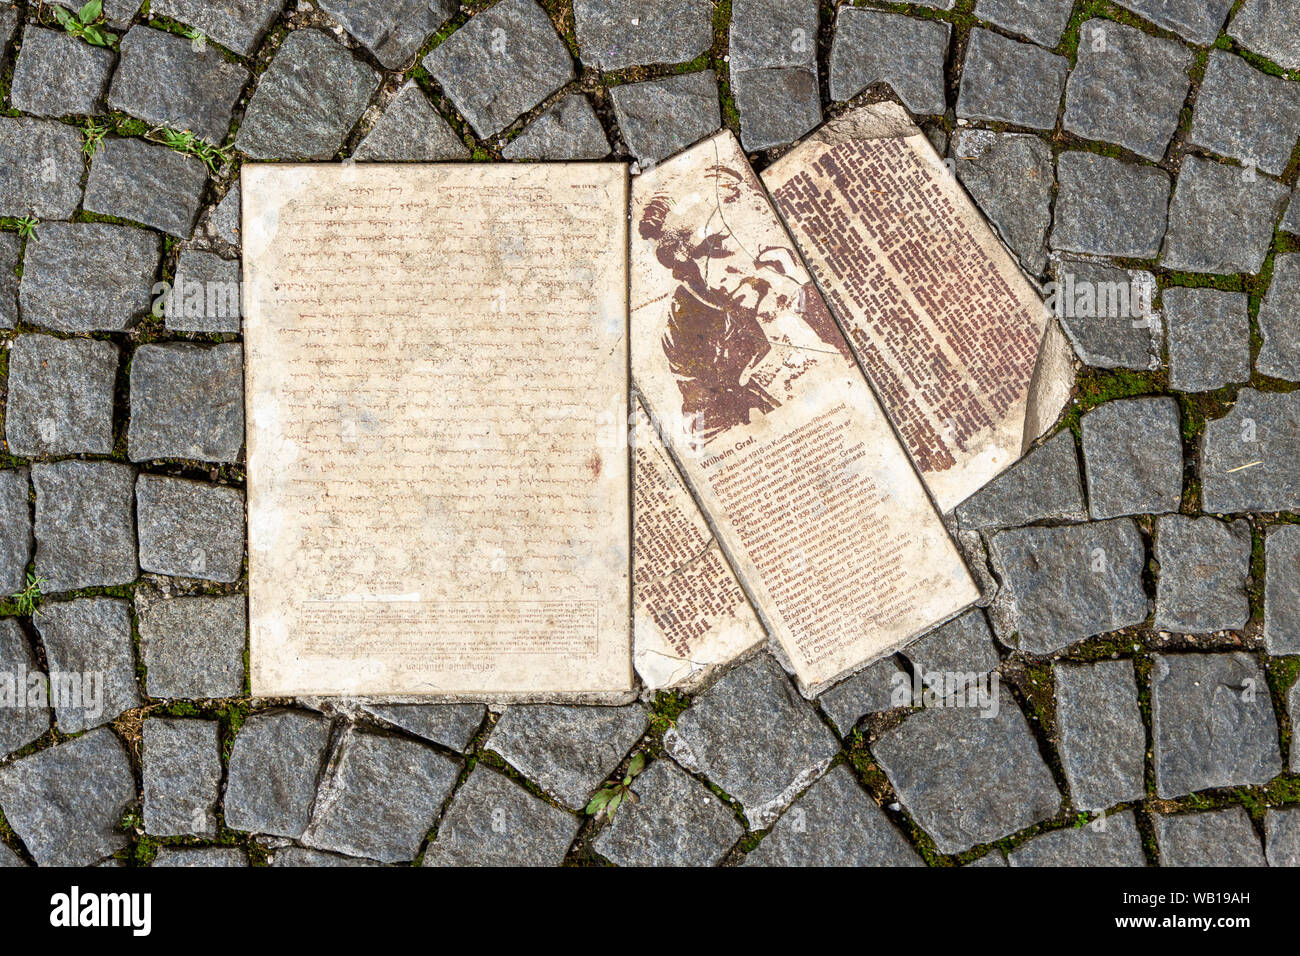 White Rose memorial of leaflets scattered on the pavement outside Ludwig Maximilian University building in Munich, Germany. Stock Photo